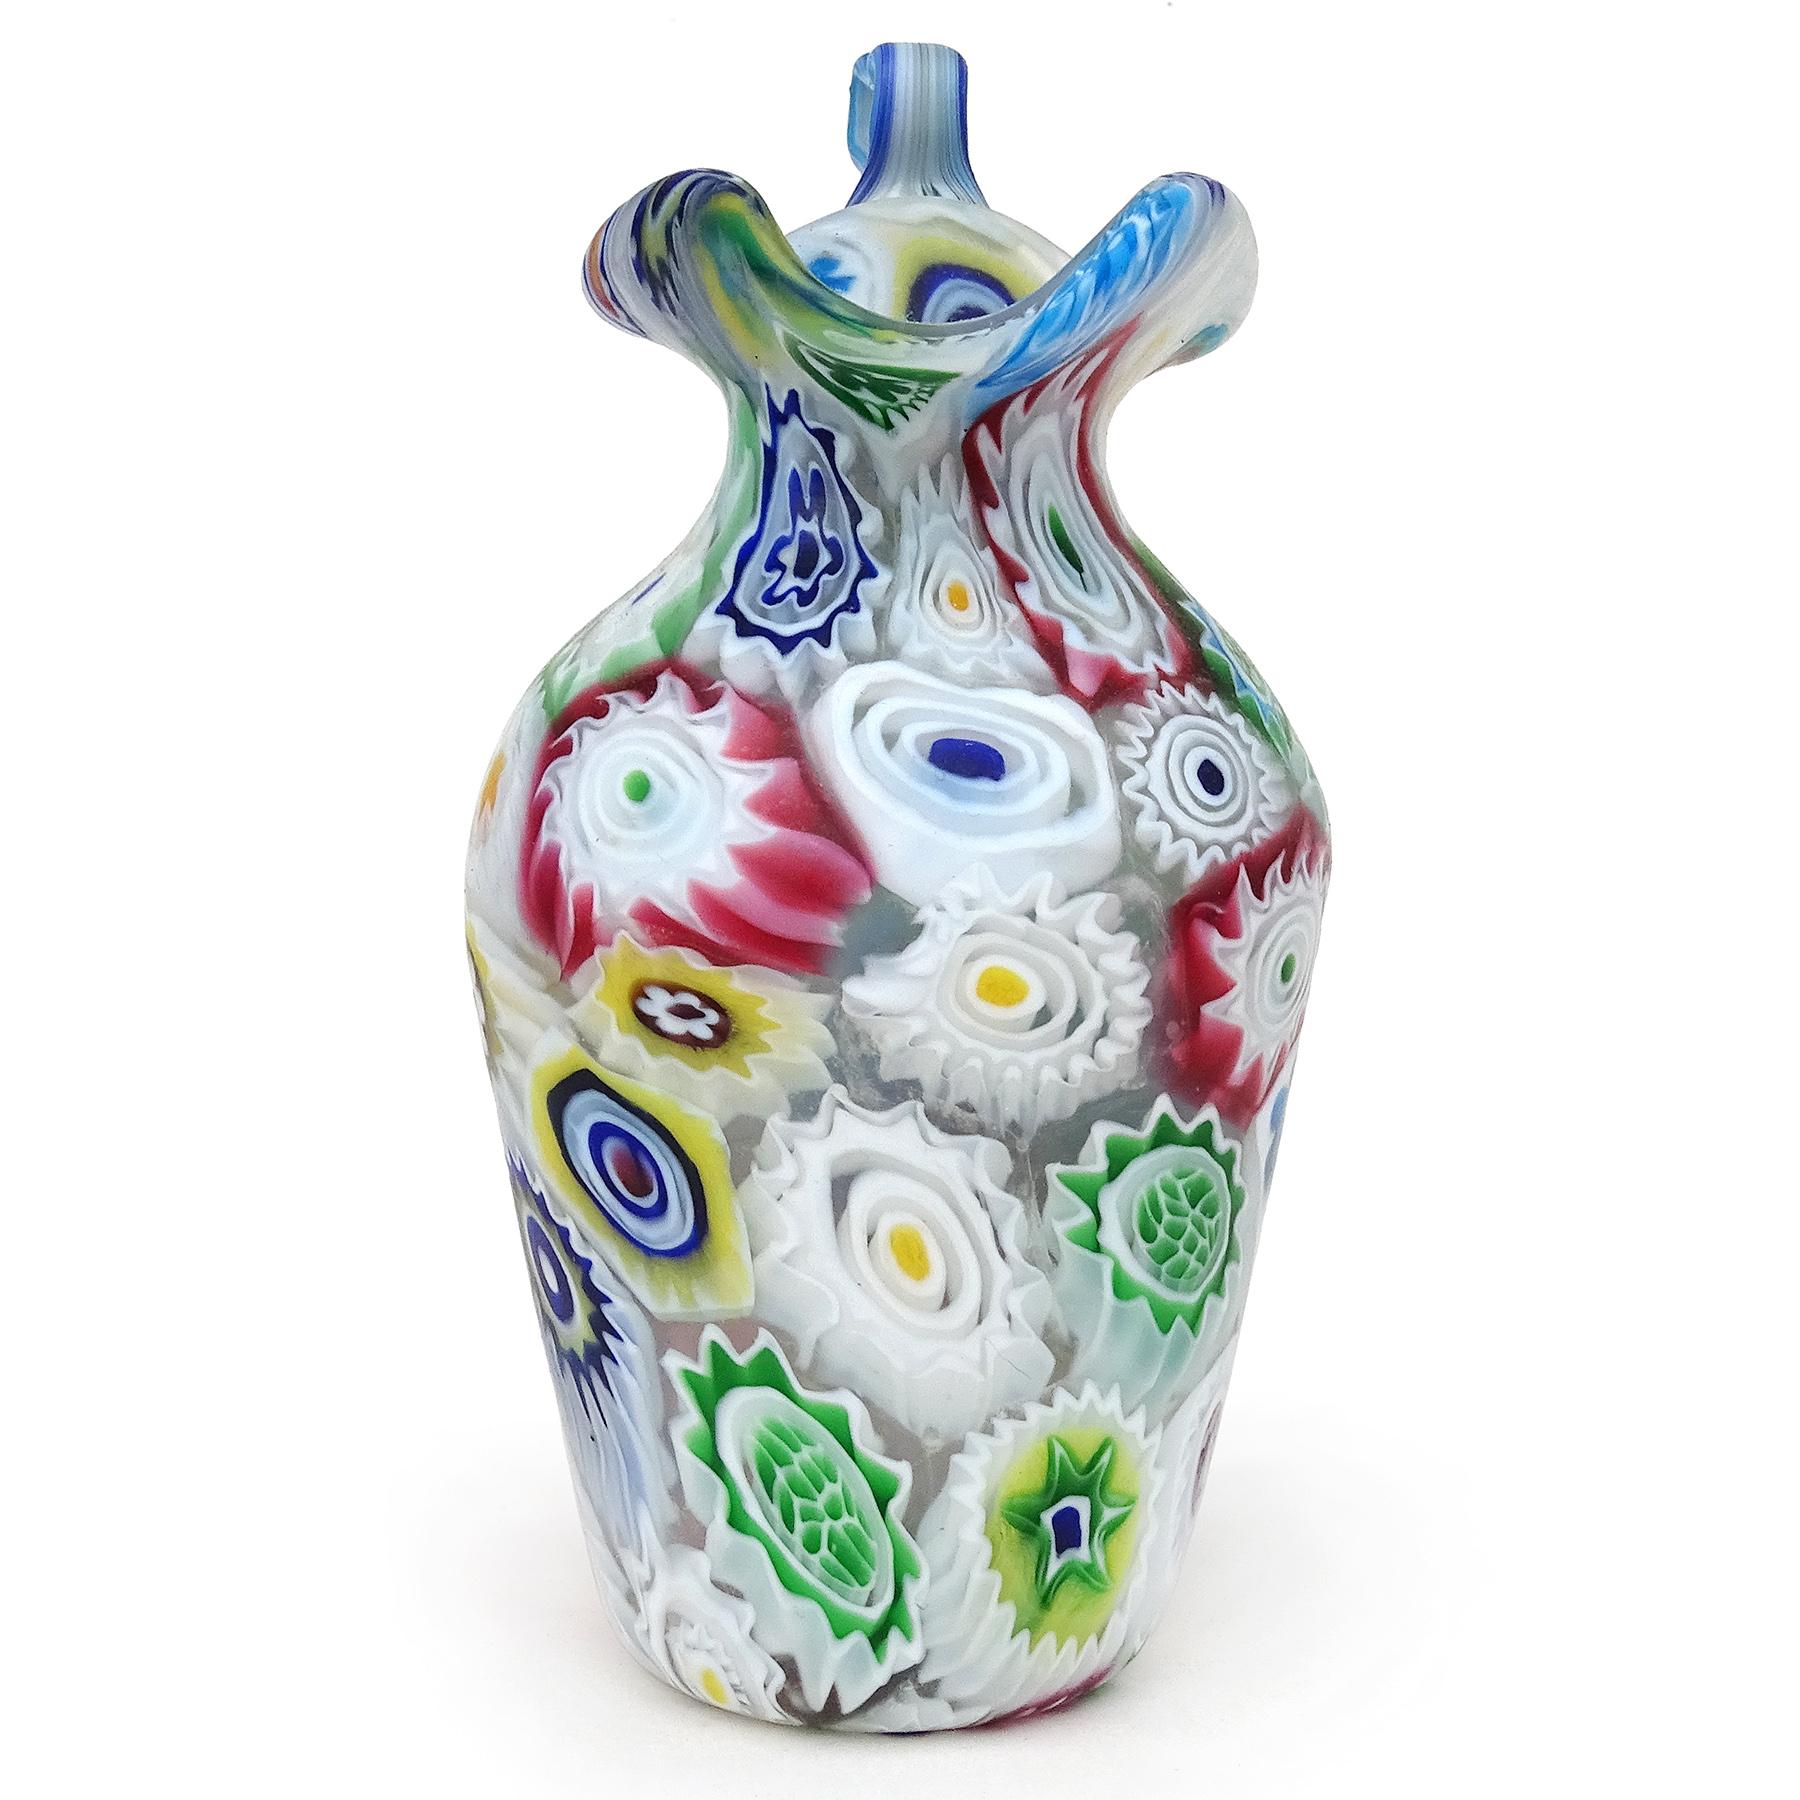 Beautiful antique Murano hand blown Millefiori Murrina flower mosaic Italian art glass decorative ornate handle cabinet vase / pitcher. Documented to the Fratelli Toso company, circa 1910-1930. The vase has an early design and unusual white